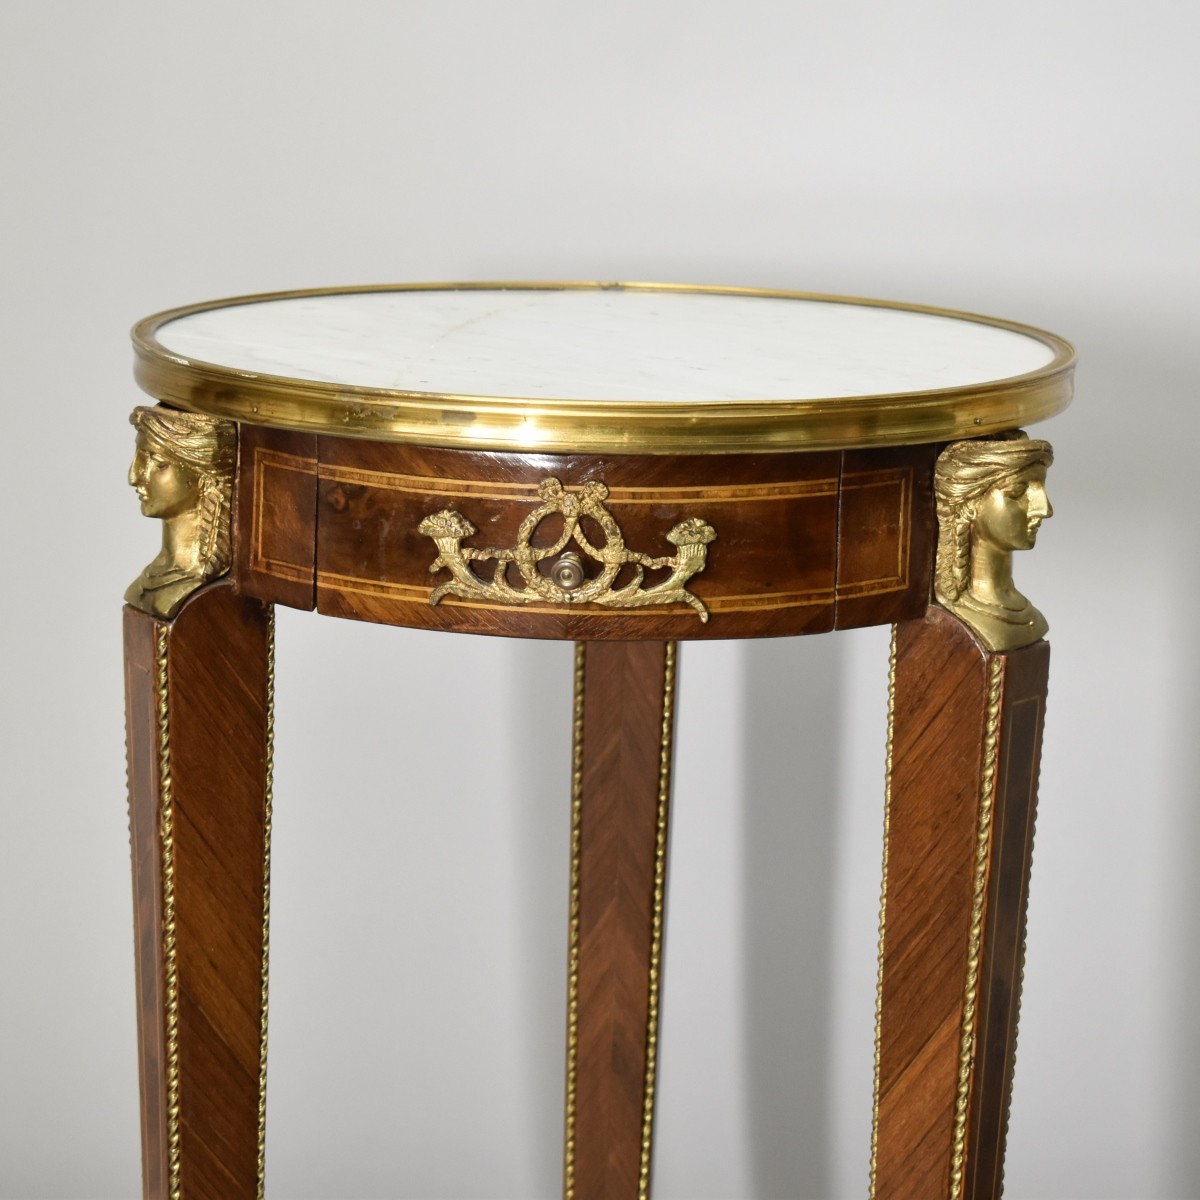 20th C. Empire Style Marble Top Pedestal